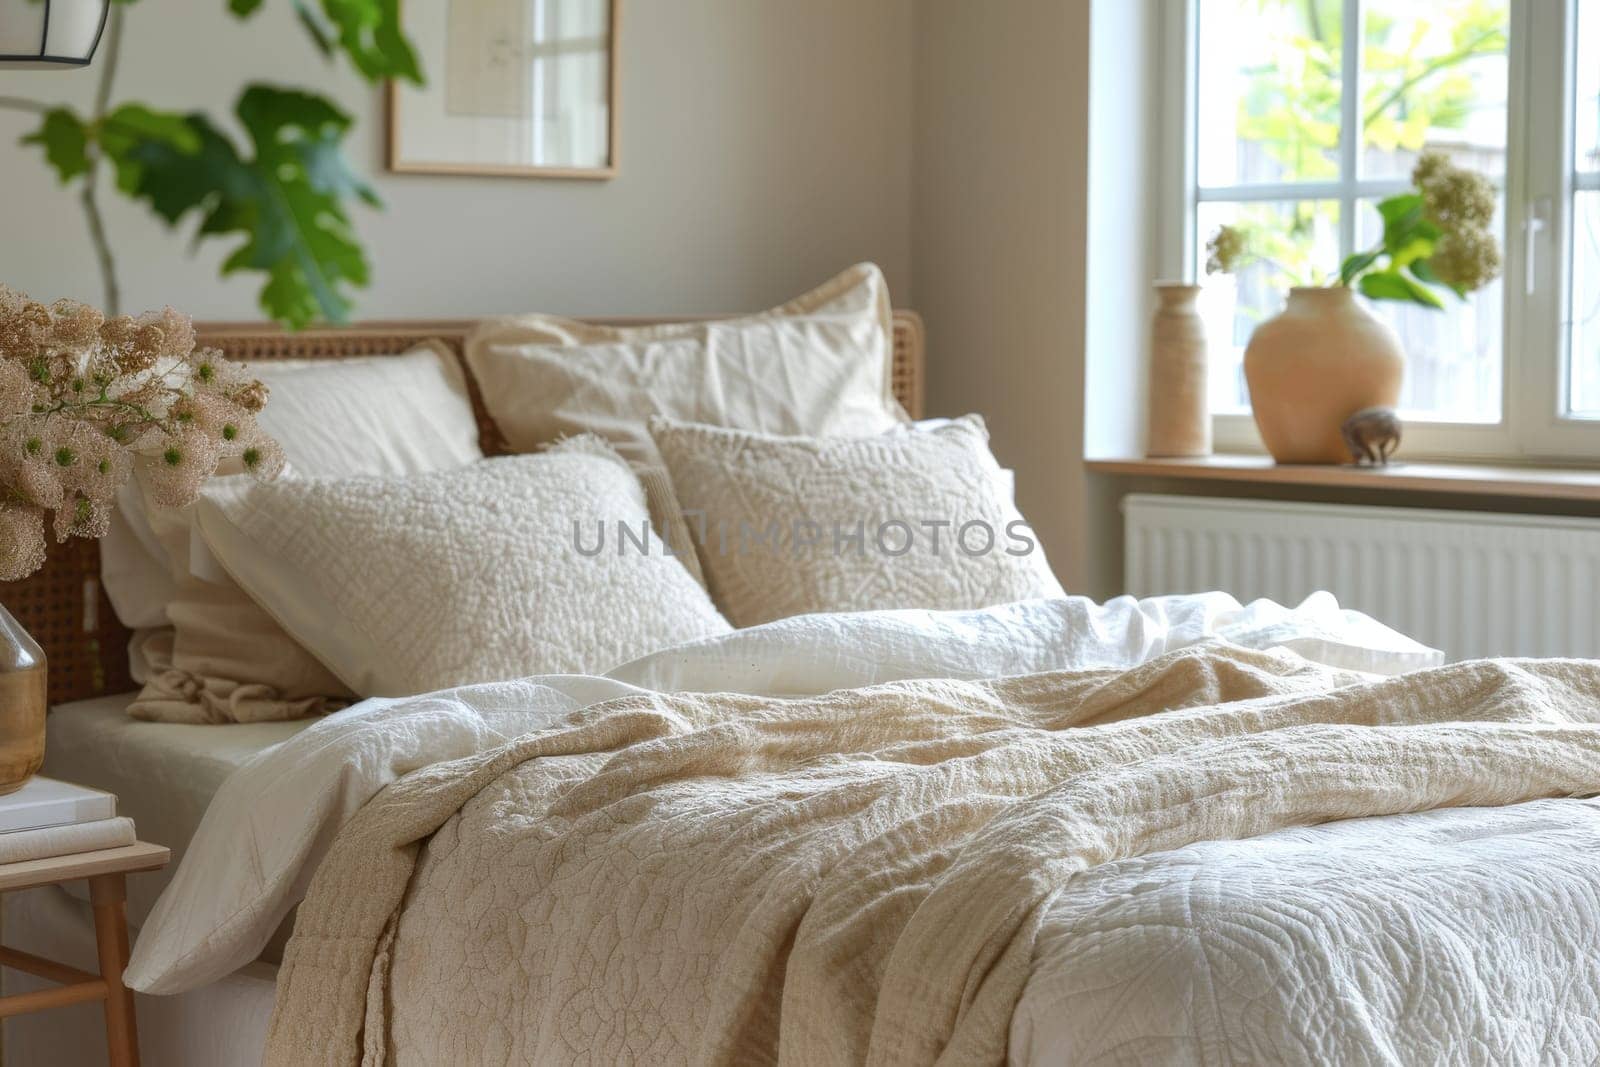 A bed with a white comforter and pillows, and a vase of flowers on a nightstand.